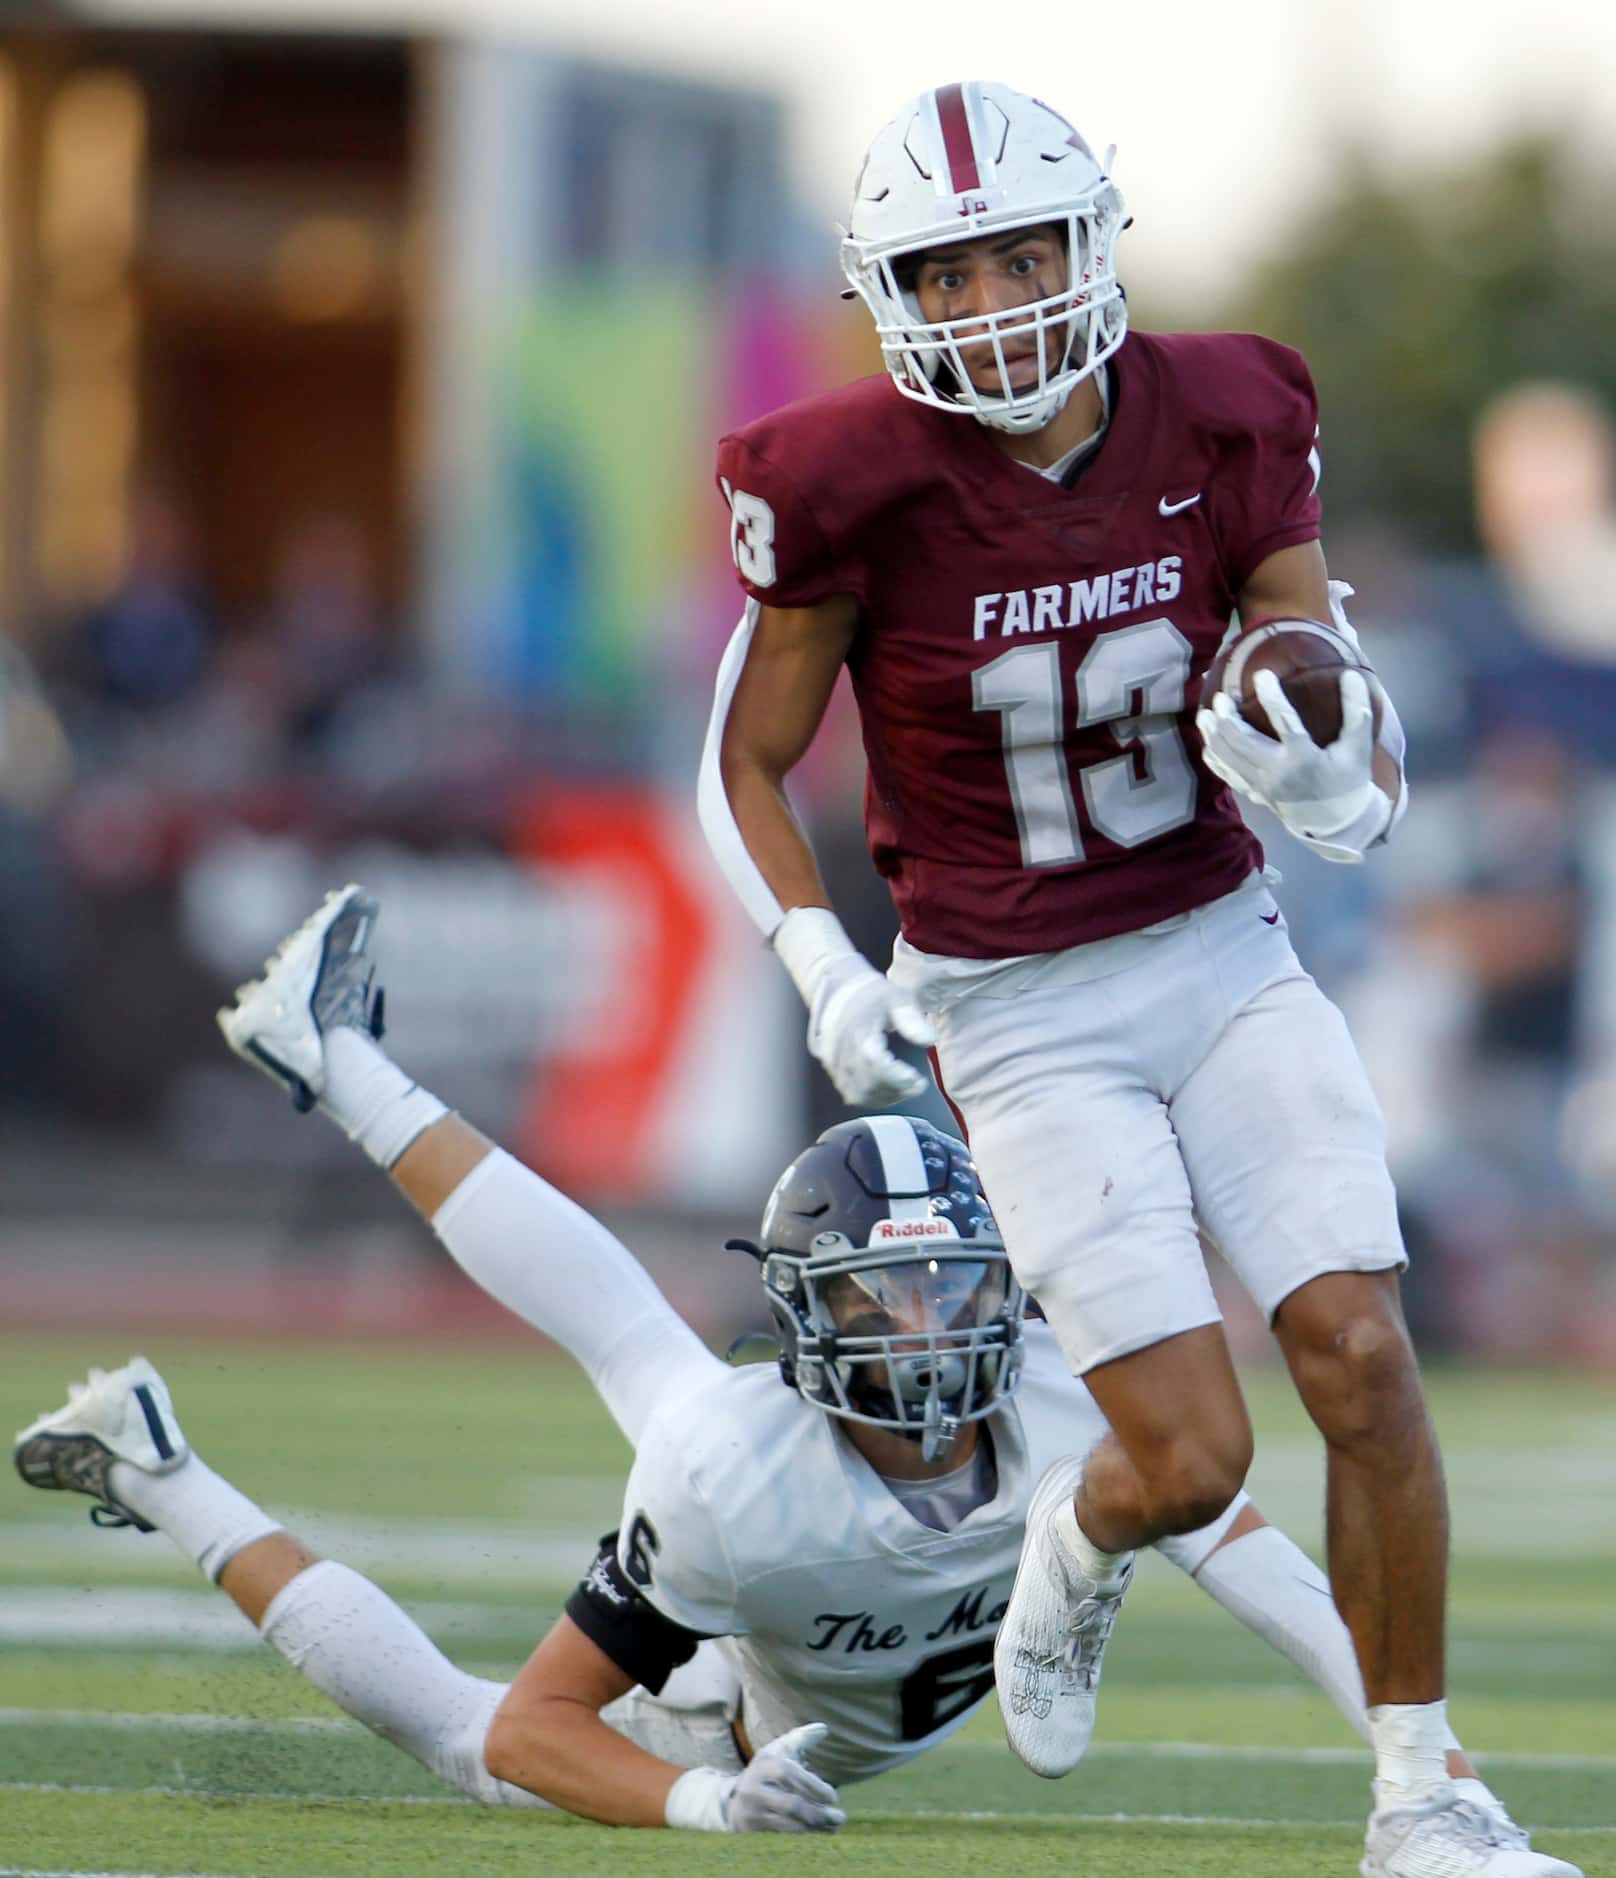 Lewisville receiver JJ Gonzales (13) eludes a diving tackle attempt by Flower Mound safety...